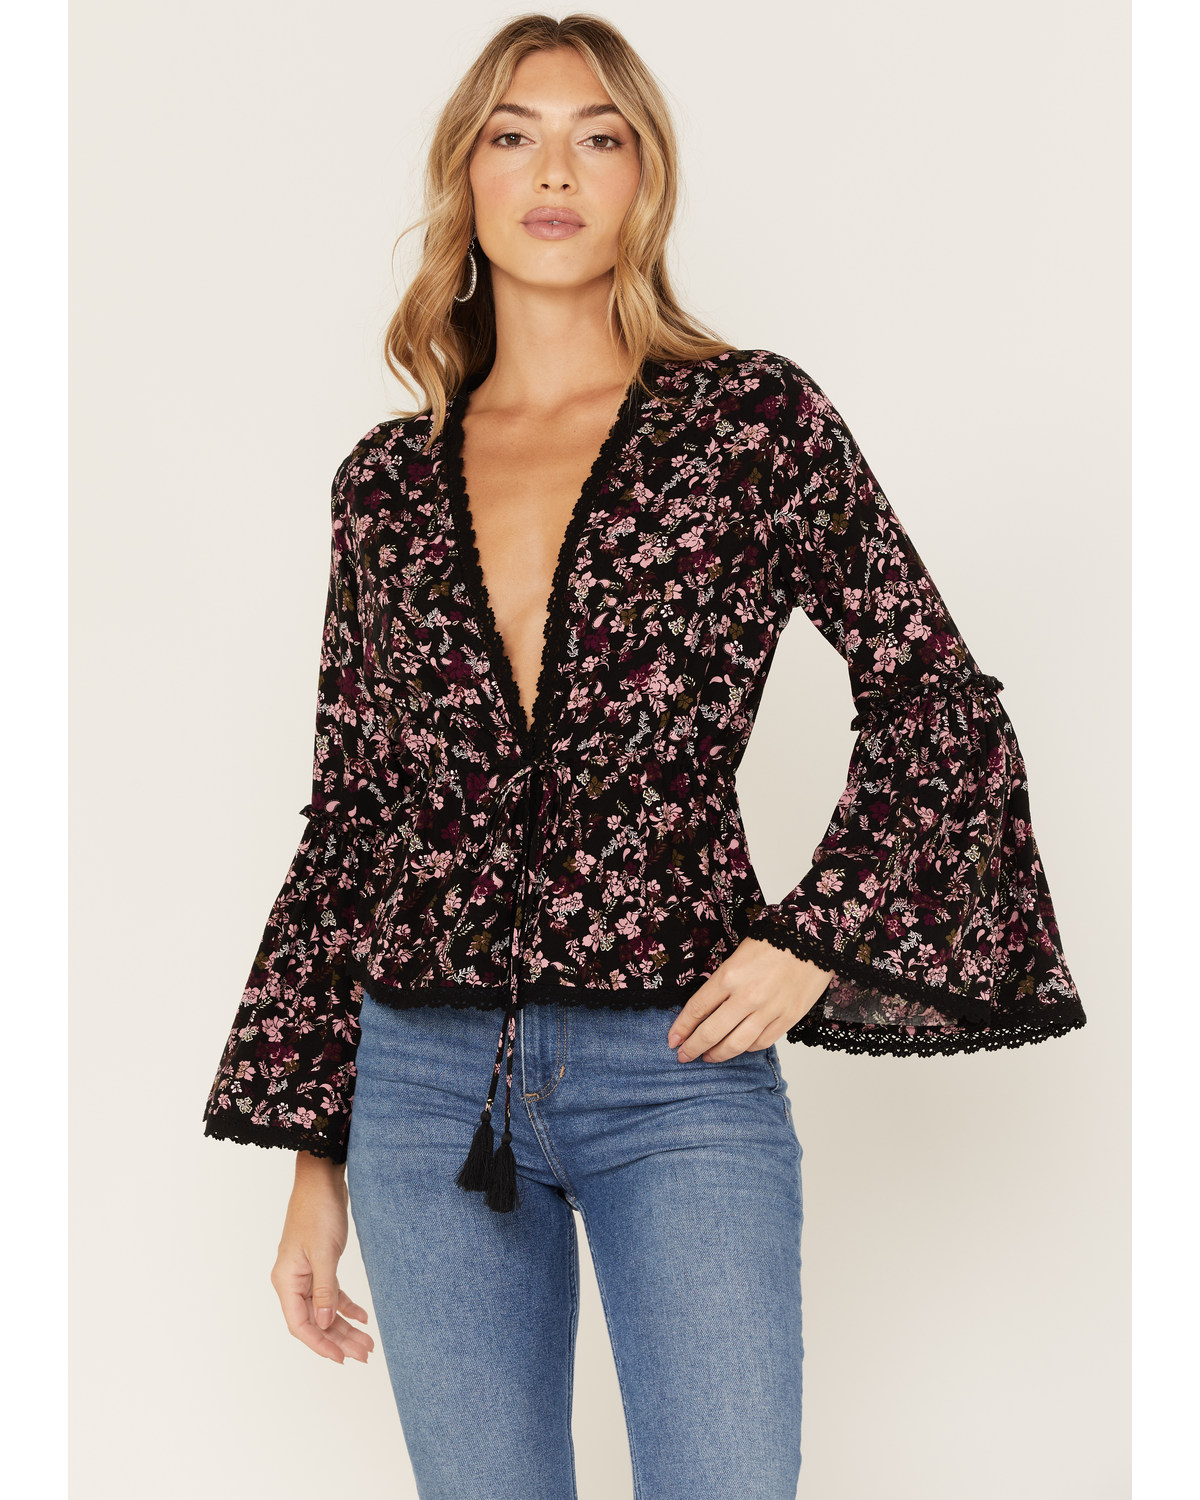 Idyllwind Women's Fall For Me Floral Print Bell Sleeve Kimono